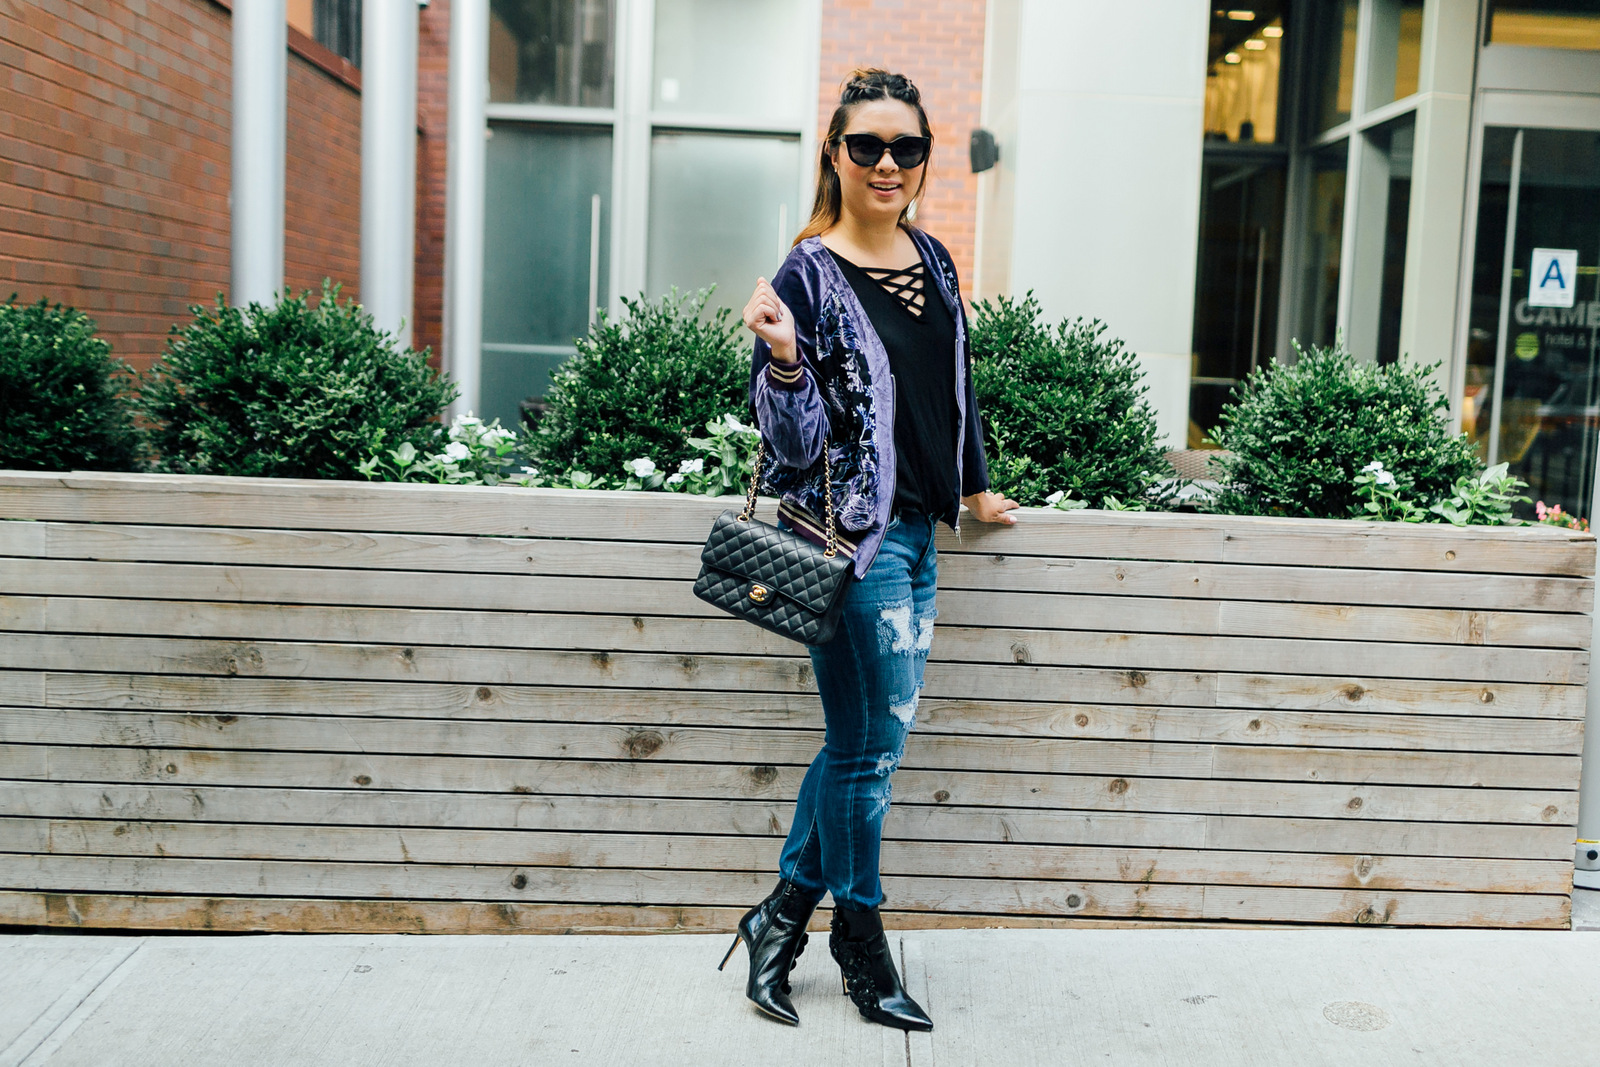  9 Fall Fashion Must Haves Every Woman Needs by Utah fashion blogger Sandy A La Mode